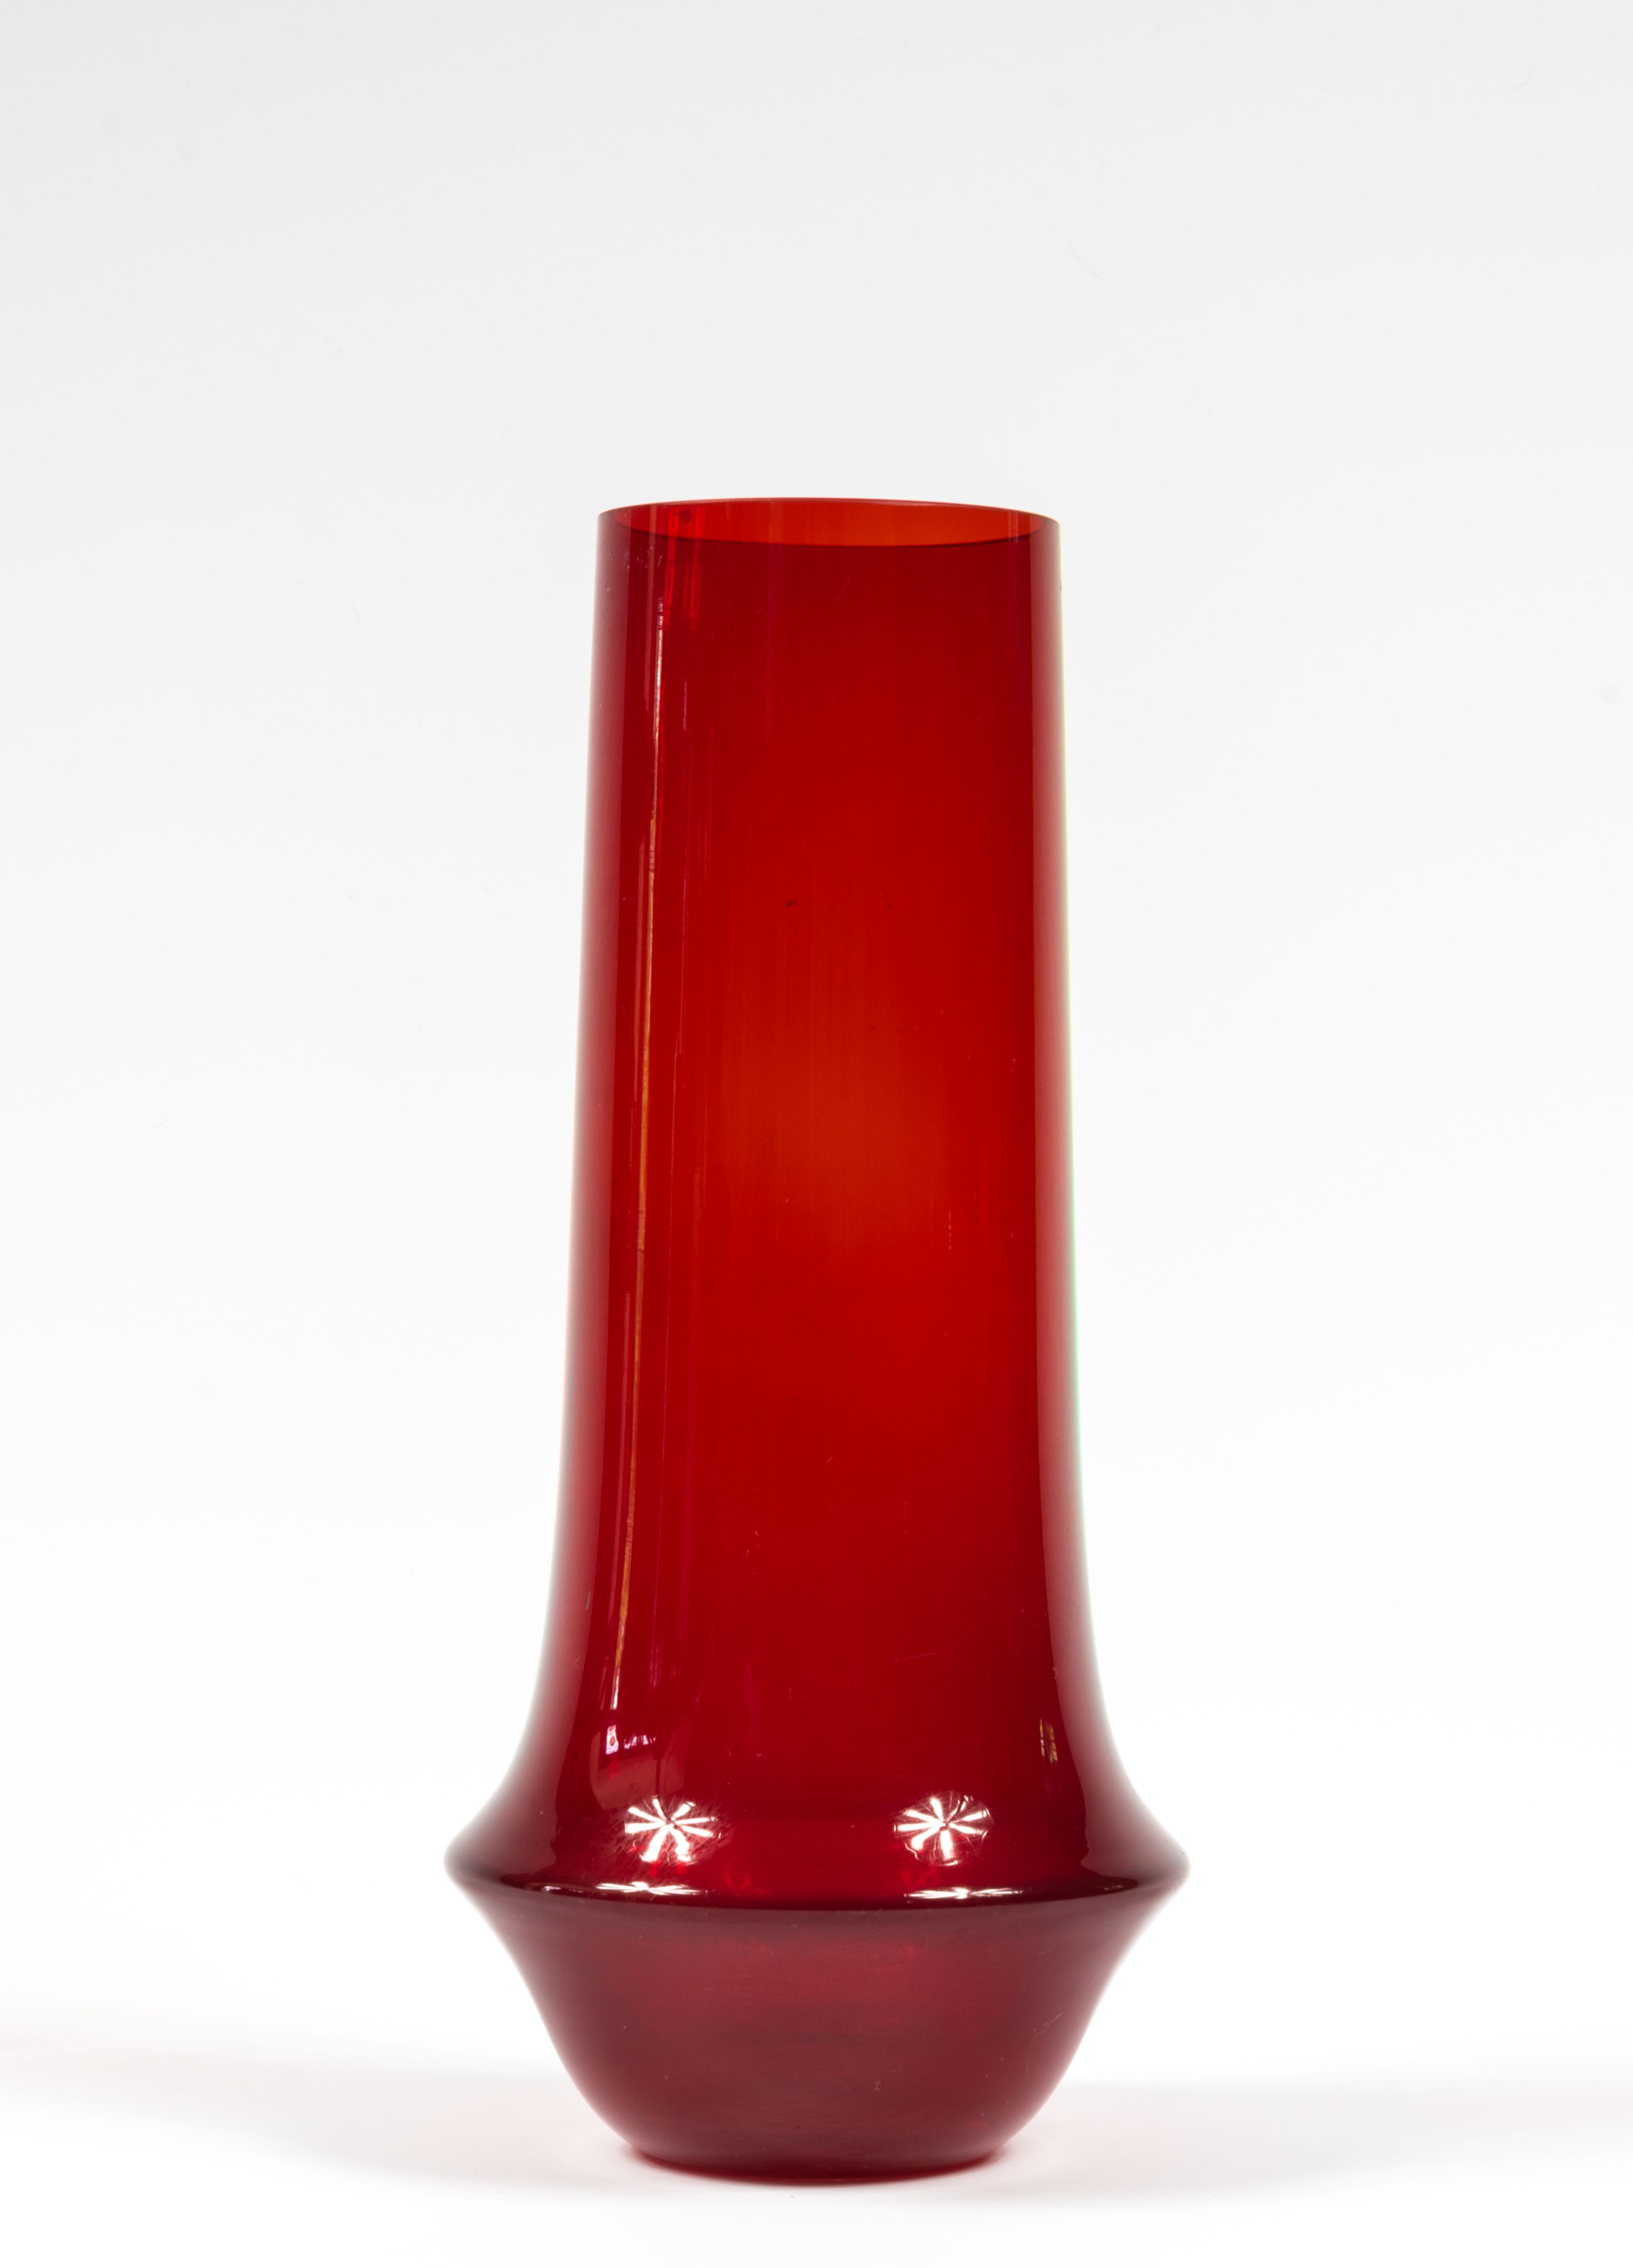 18 attractive Large Clear Glass Cylinder Vases 2022 free download large clear glass cylinder vases of riihimac2a4en lasi oy riihimaki red glass vase by tamara aladin in large scandinavian red glass vase designed by tamara aladin c1963 for riihimaki riihima